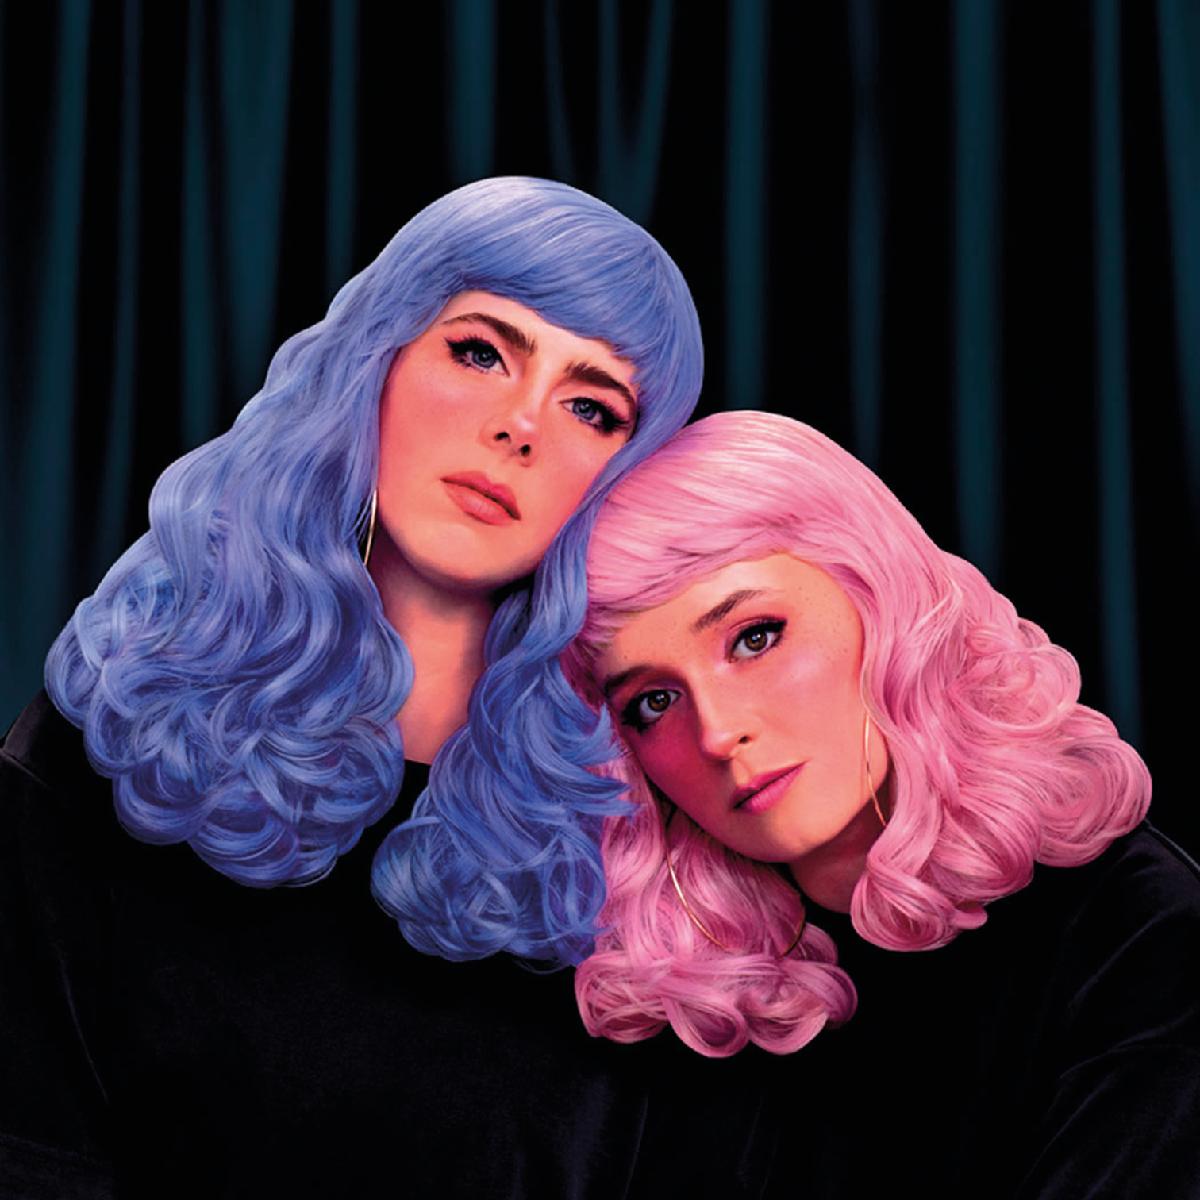 Album cover: two women with long hair - one pink-haired, and another blue-haired - on a dark background. - grafika artykułu